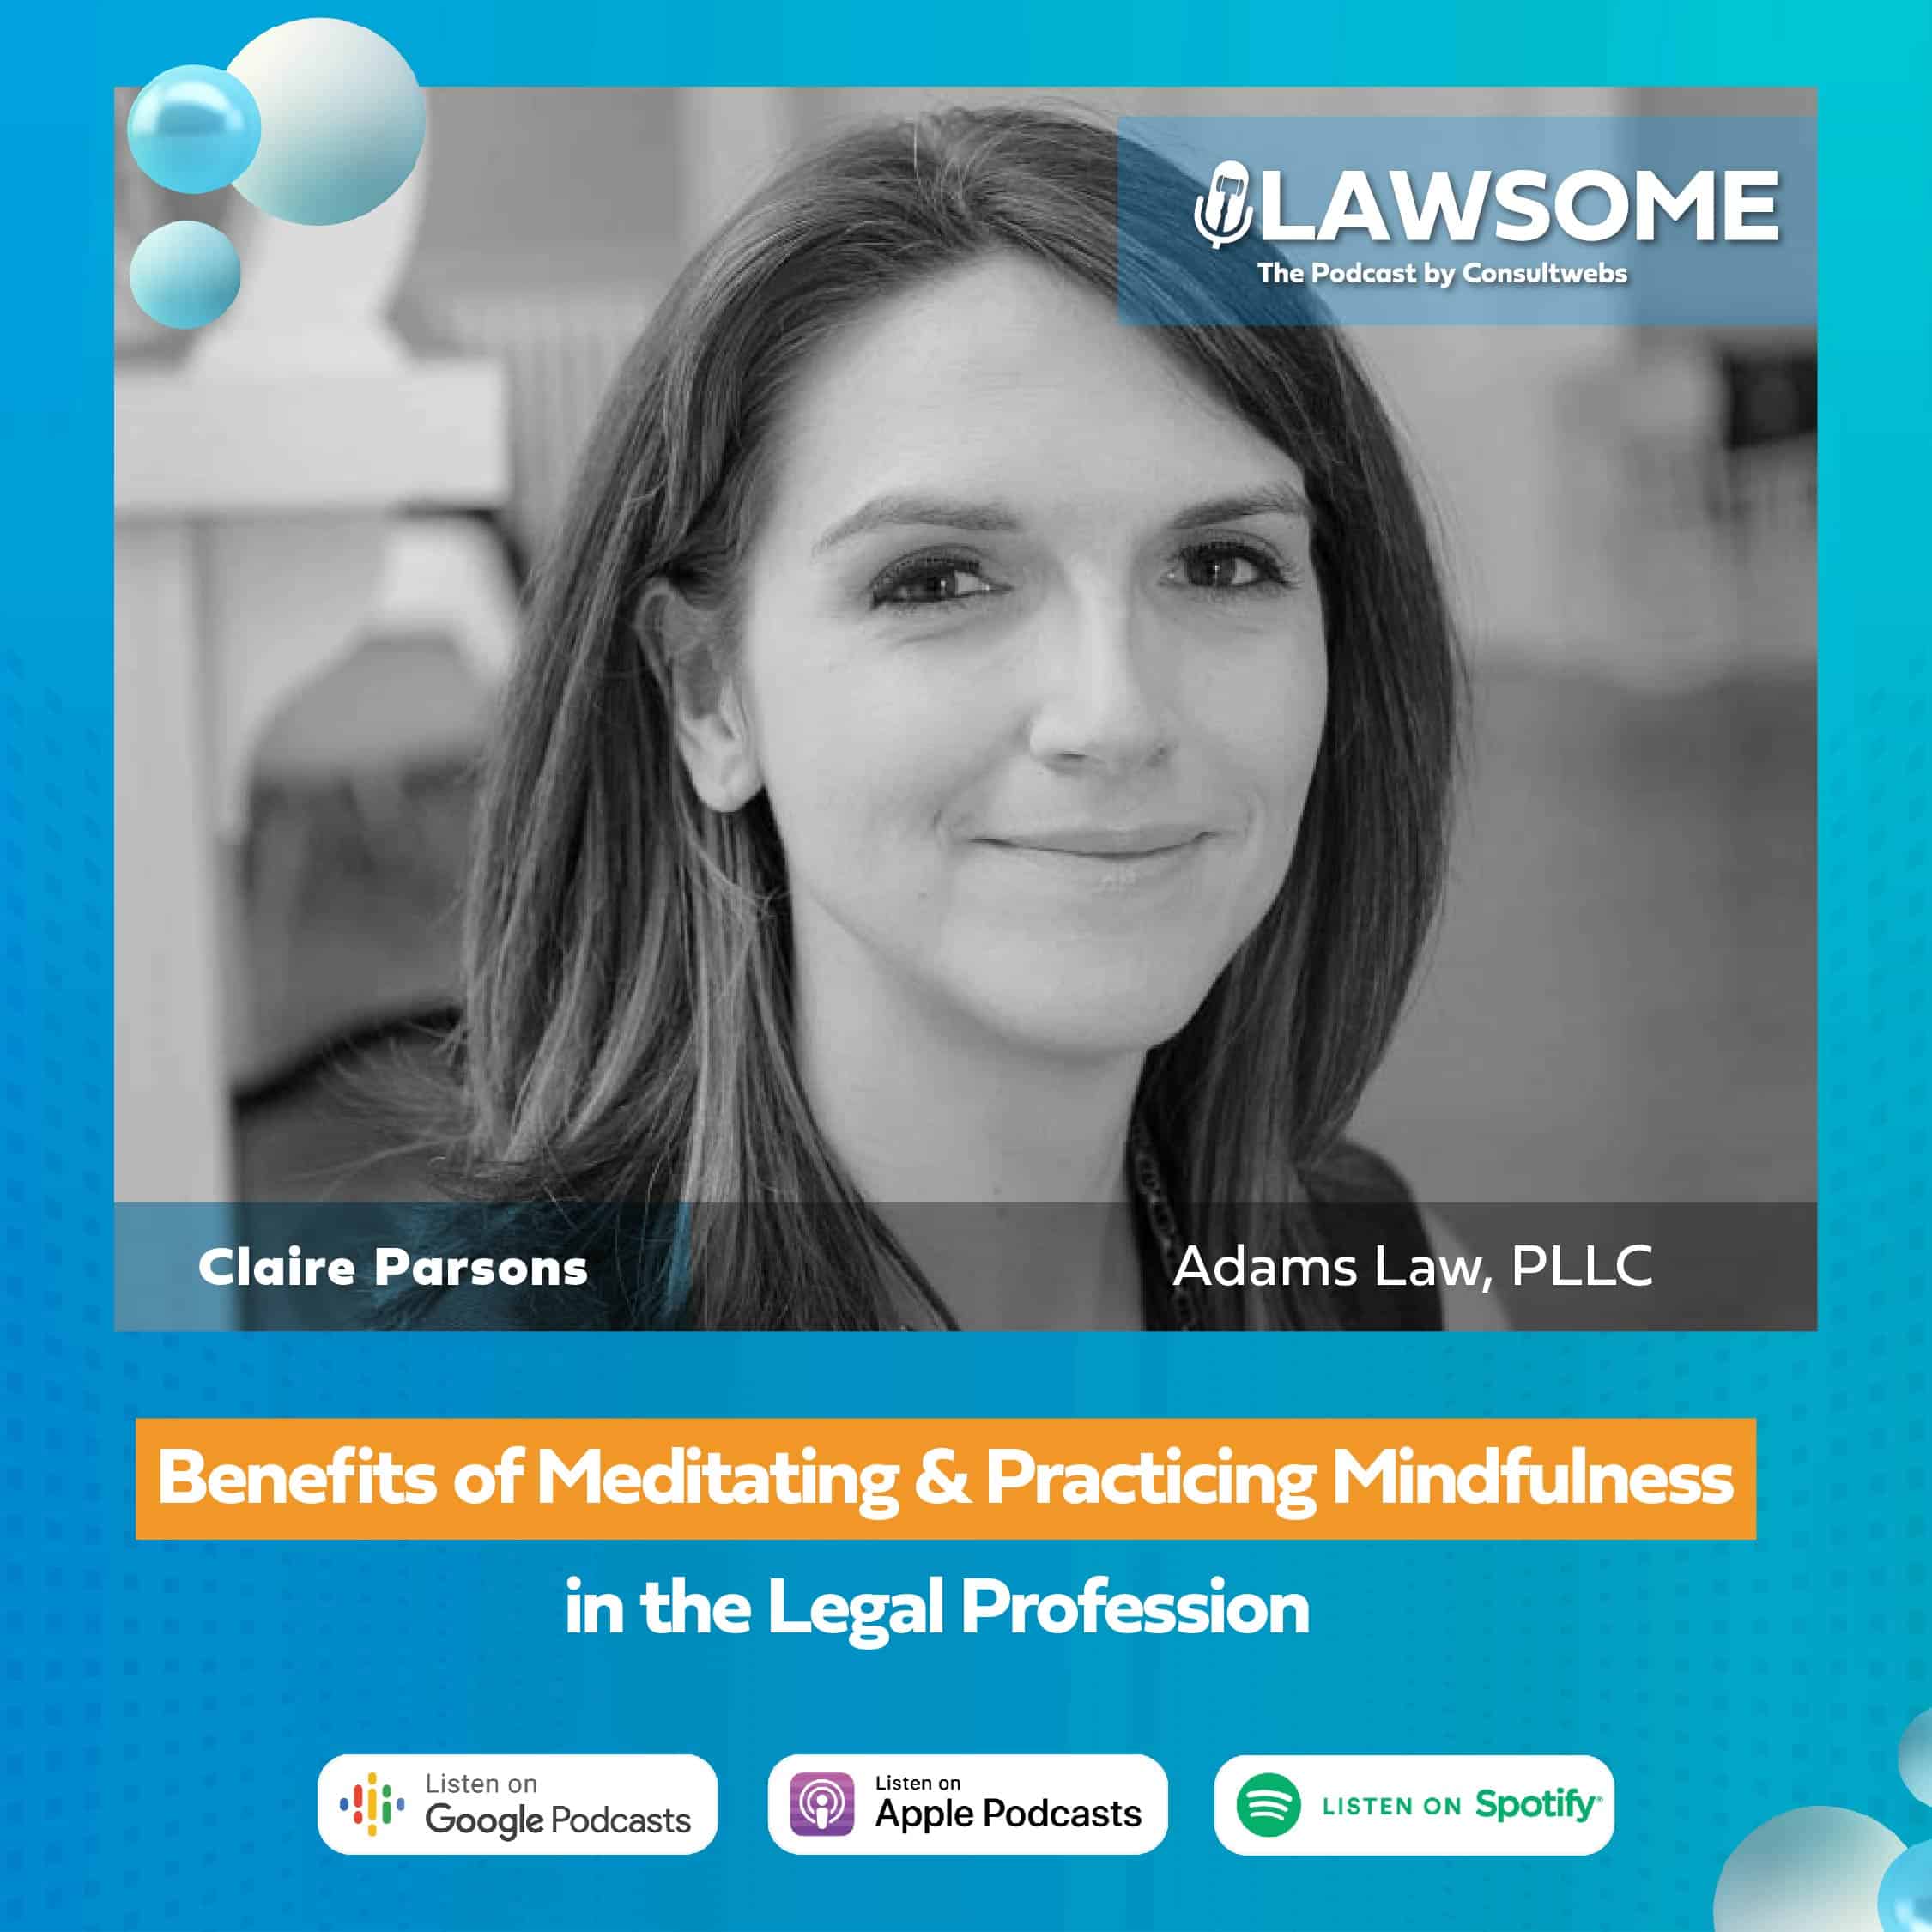 Claire parsons discusses legal well-being on mindfulness in law podcast.